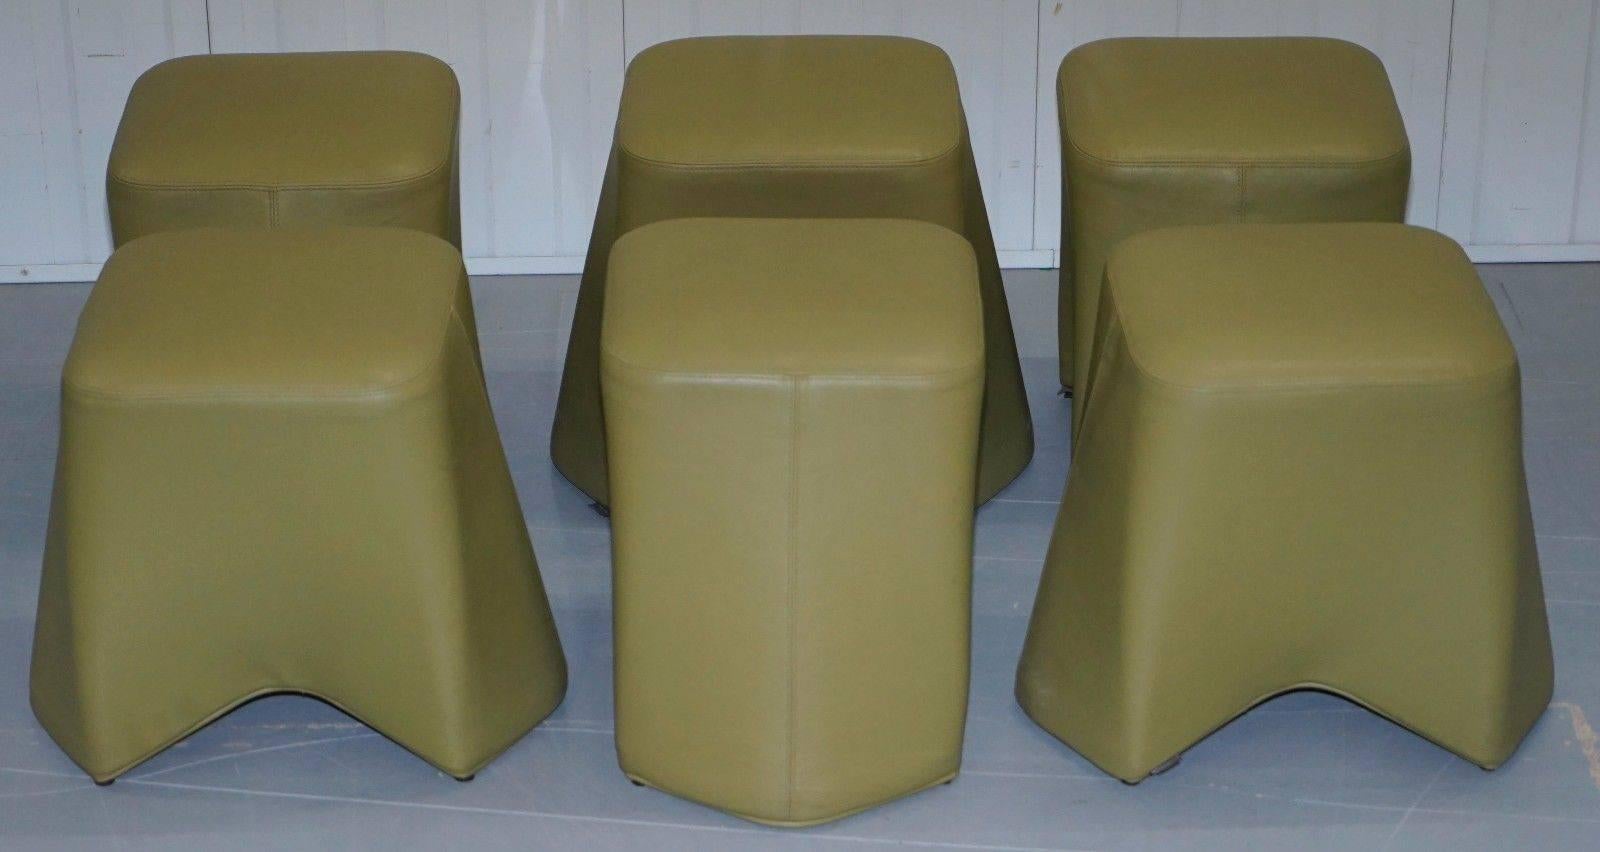 We are delighted to offer for sale 1 of 6 Boss Design green leather modular contemporary stools RRP £880 each

This auction is for one piece with the option to buy all six

Very good looking and well-made pieces that are very versatile and sit